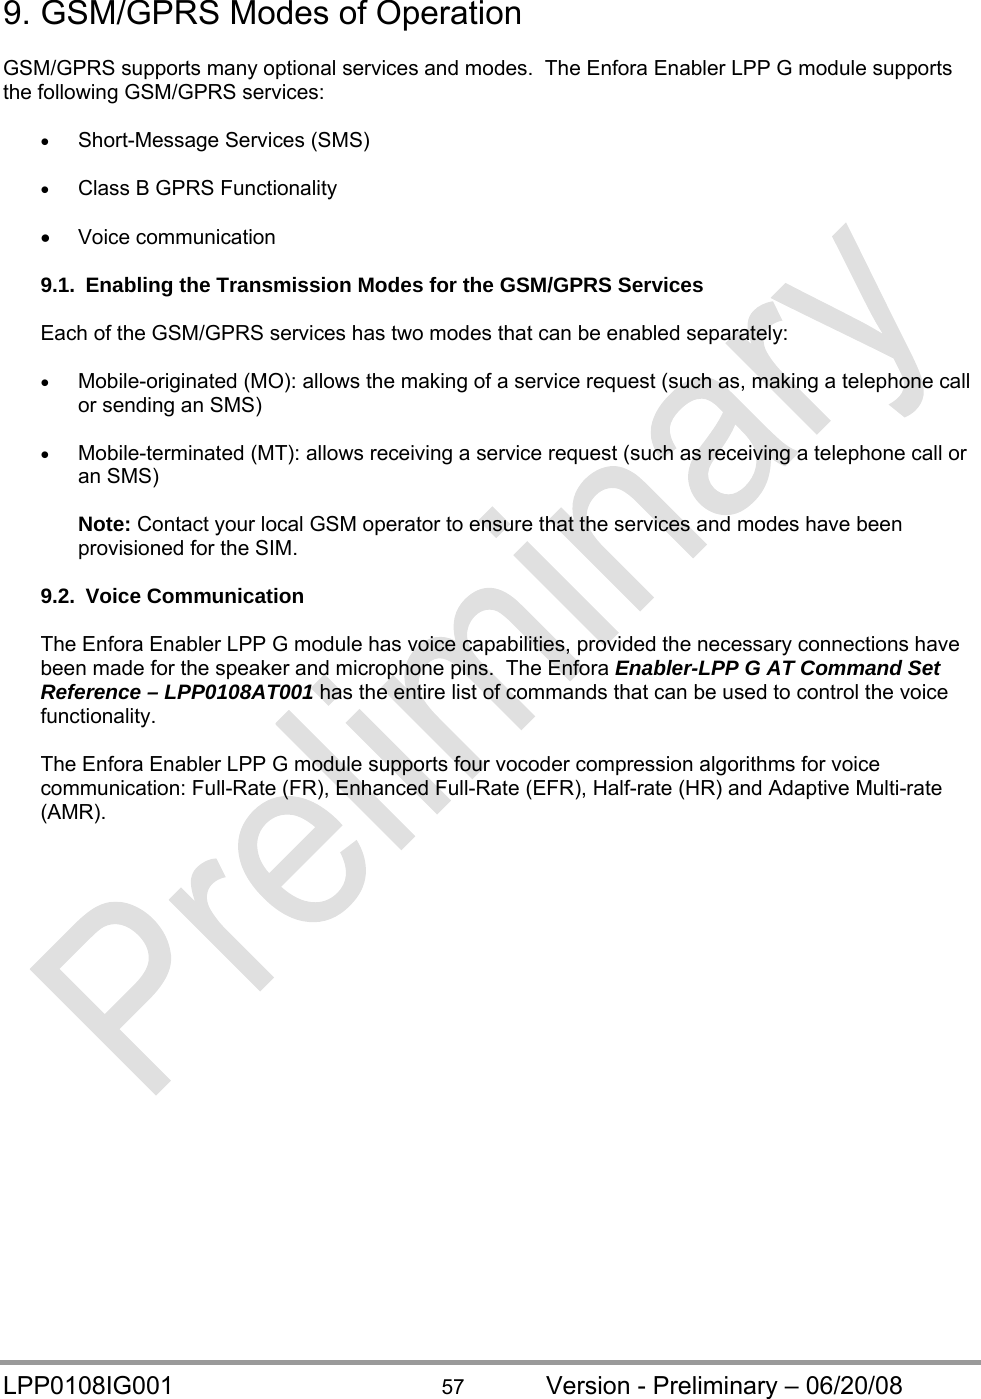  LPP0108IG001  57  Version - Preliminary – 06/20/08 9. GSM/GPRS Modes of Operation  GSM/GPRS supports many optional services and modes.  The Enfora Enabler LPP G module supports the following GSM/GPRS services:   Short-Message Services (SMS)   Class B GPRS Functionality   Voice communication  9.1.  Enabling the Transmission Modes for the GSM/GPRS Services  Each of the GSM/GPRS services has two modes that can be enabled separately:   Mobile-originated (MO): allows the making of a service request (such as, making a telephone call or sending an SMS)   Mobile-terminated (MT): allows receiving a service request (such as receiving a telephone call or an SMS)  Note: Contact your local GSM operator to ensure that the services and modes have been provisioned for the SIM.  9.2. Voice Communication  The Enfora Enabler LPP G module has voice capabilities, provided the necessary connections have been made for the speaker and microphone pins.  The Enfora Enabler-LPP G AT Command Set Reference – LPP0108AT001 has the entire list of commands that can be used to control the voice functionality.   The Enfora Enabler LPP G module supports four vocoder compression algorithms for voice communication: Full-Rate (FR), Enhanced Full-Rate (EFR), Half-rate (HR) and Adaptive Multi-rate (AMR).   